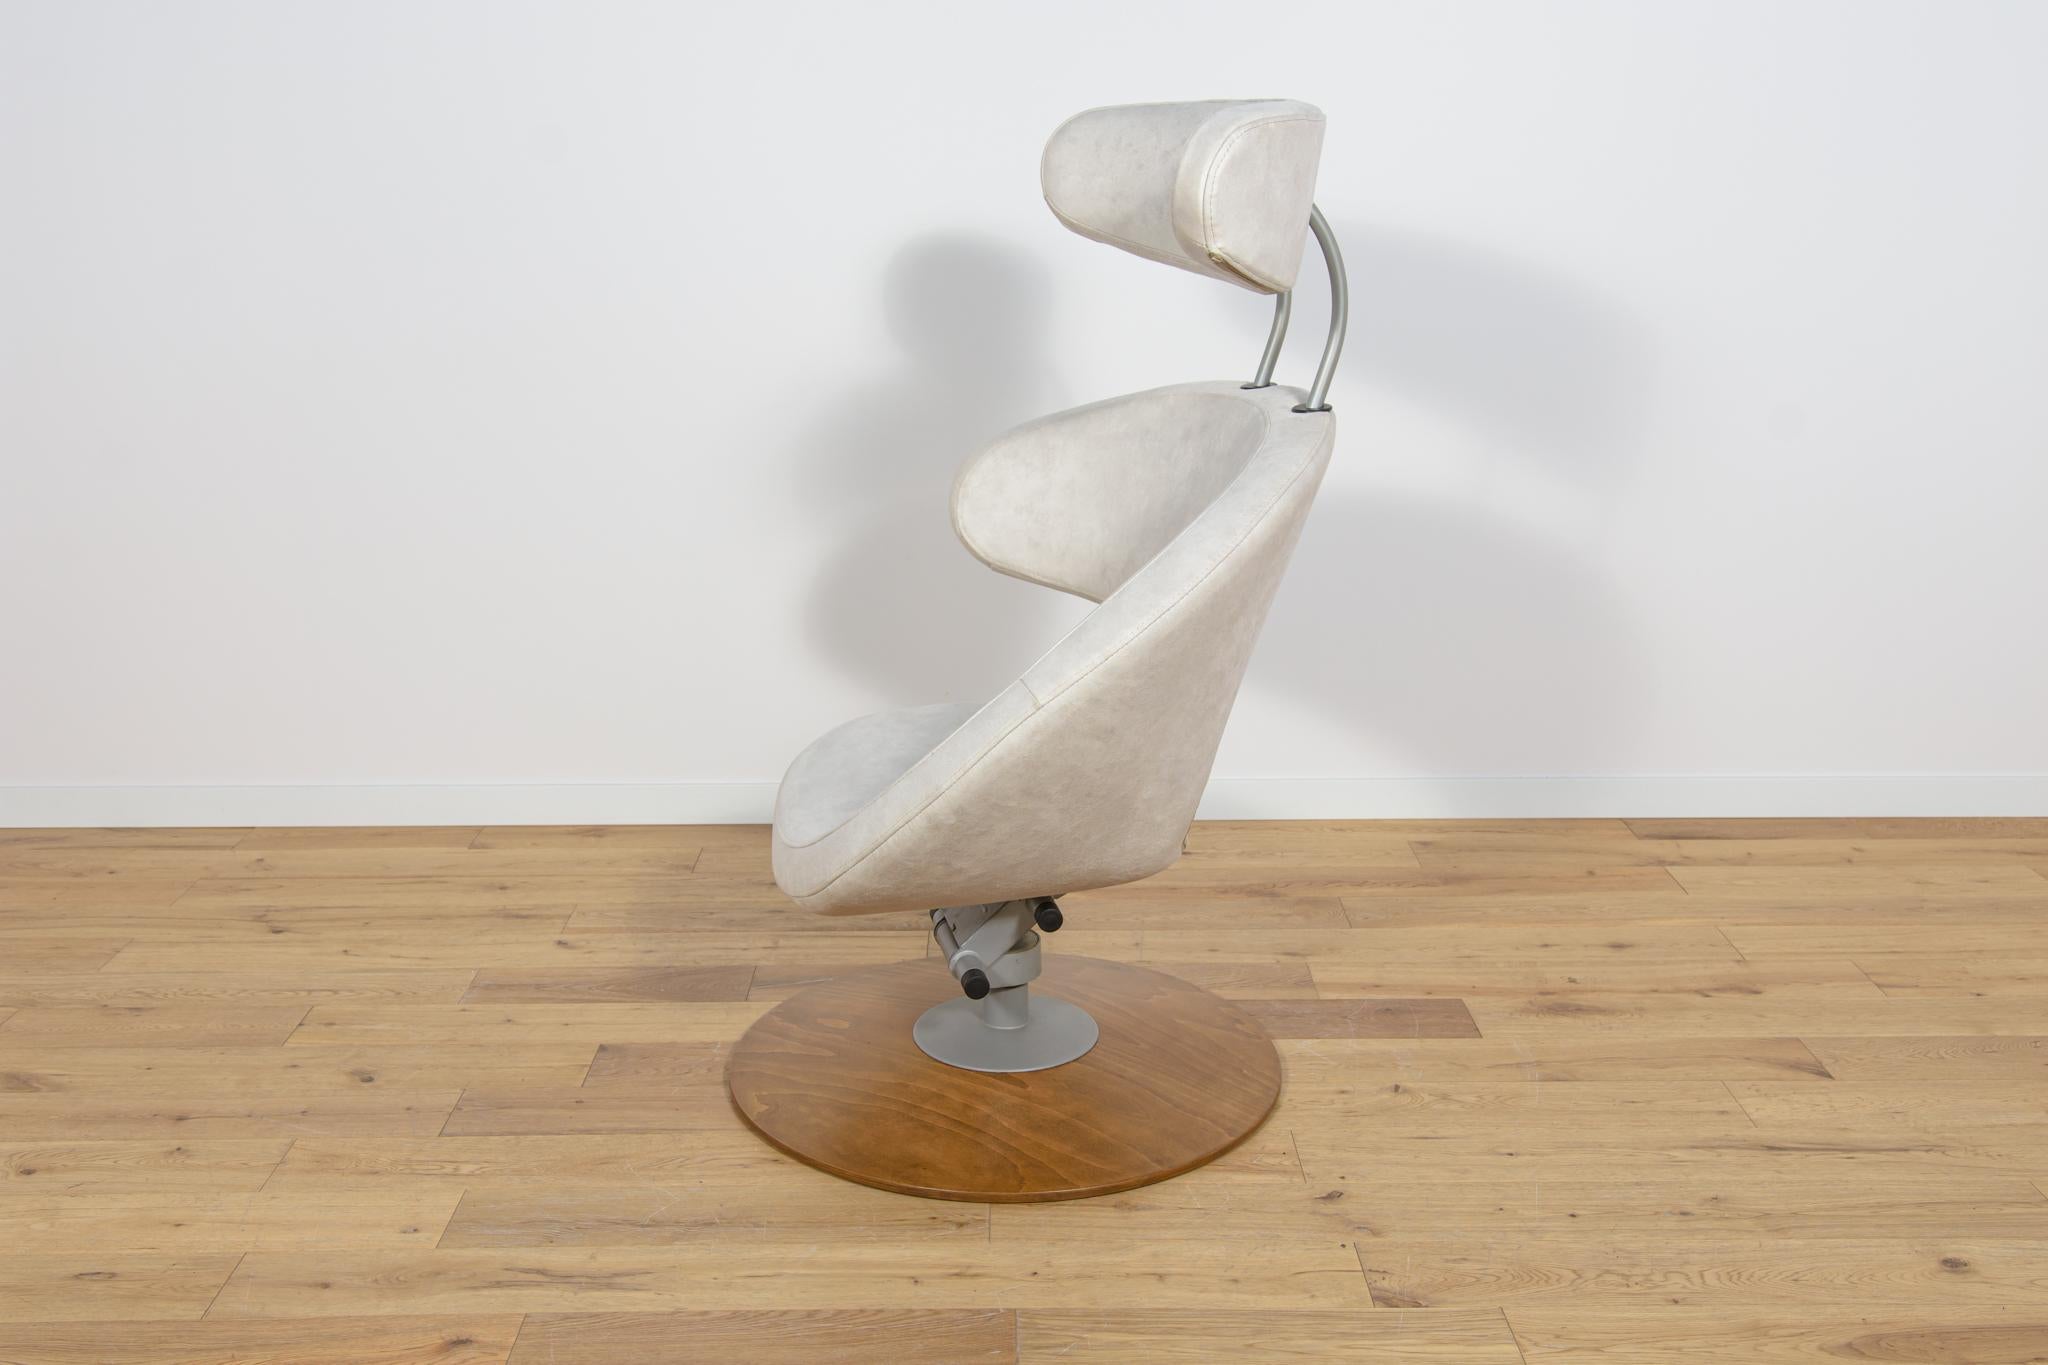 Fabric Ergonomic Lounge Chair Model Peel with Ottoman by Olav Eldoy for Stokke, 2000s. For Sale